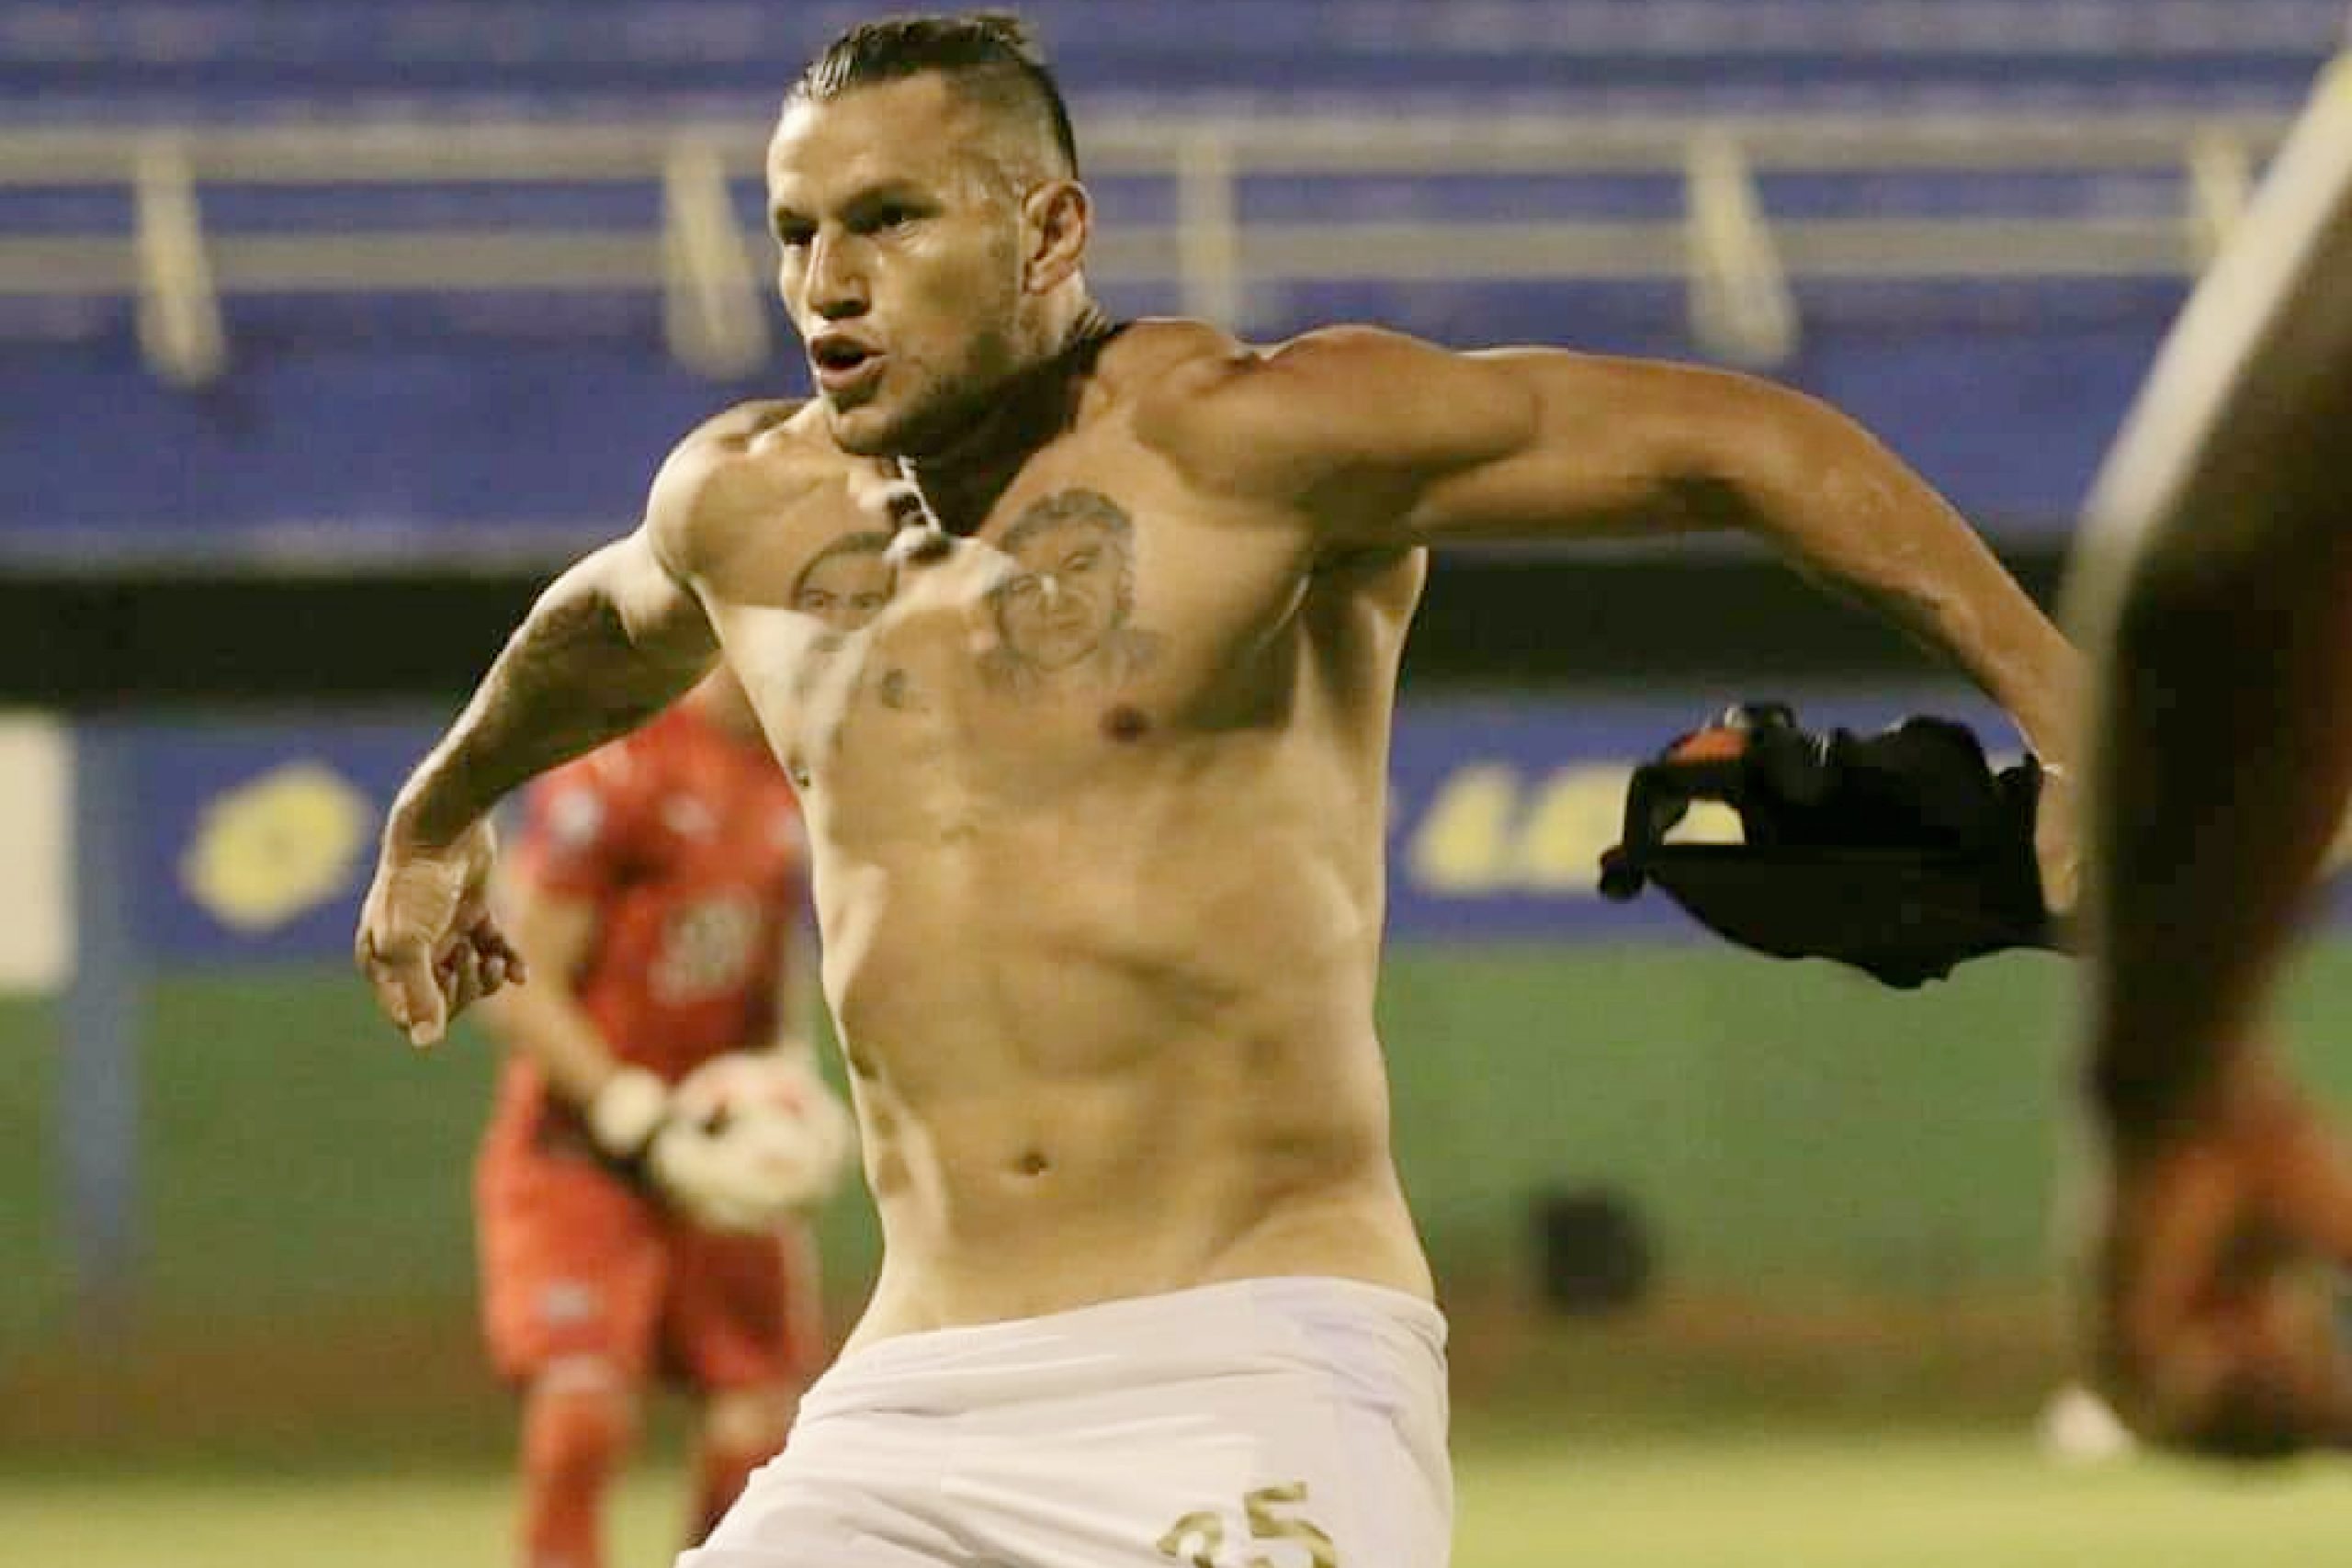 Video – Raul Bobadilla flashes waxed pubic area after goal against Libertad